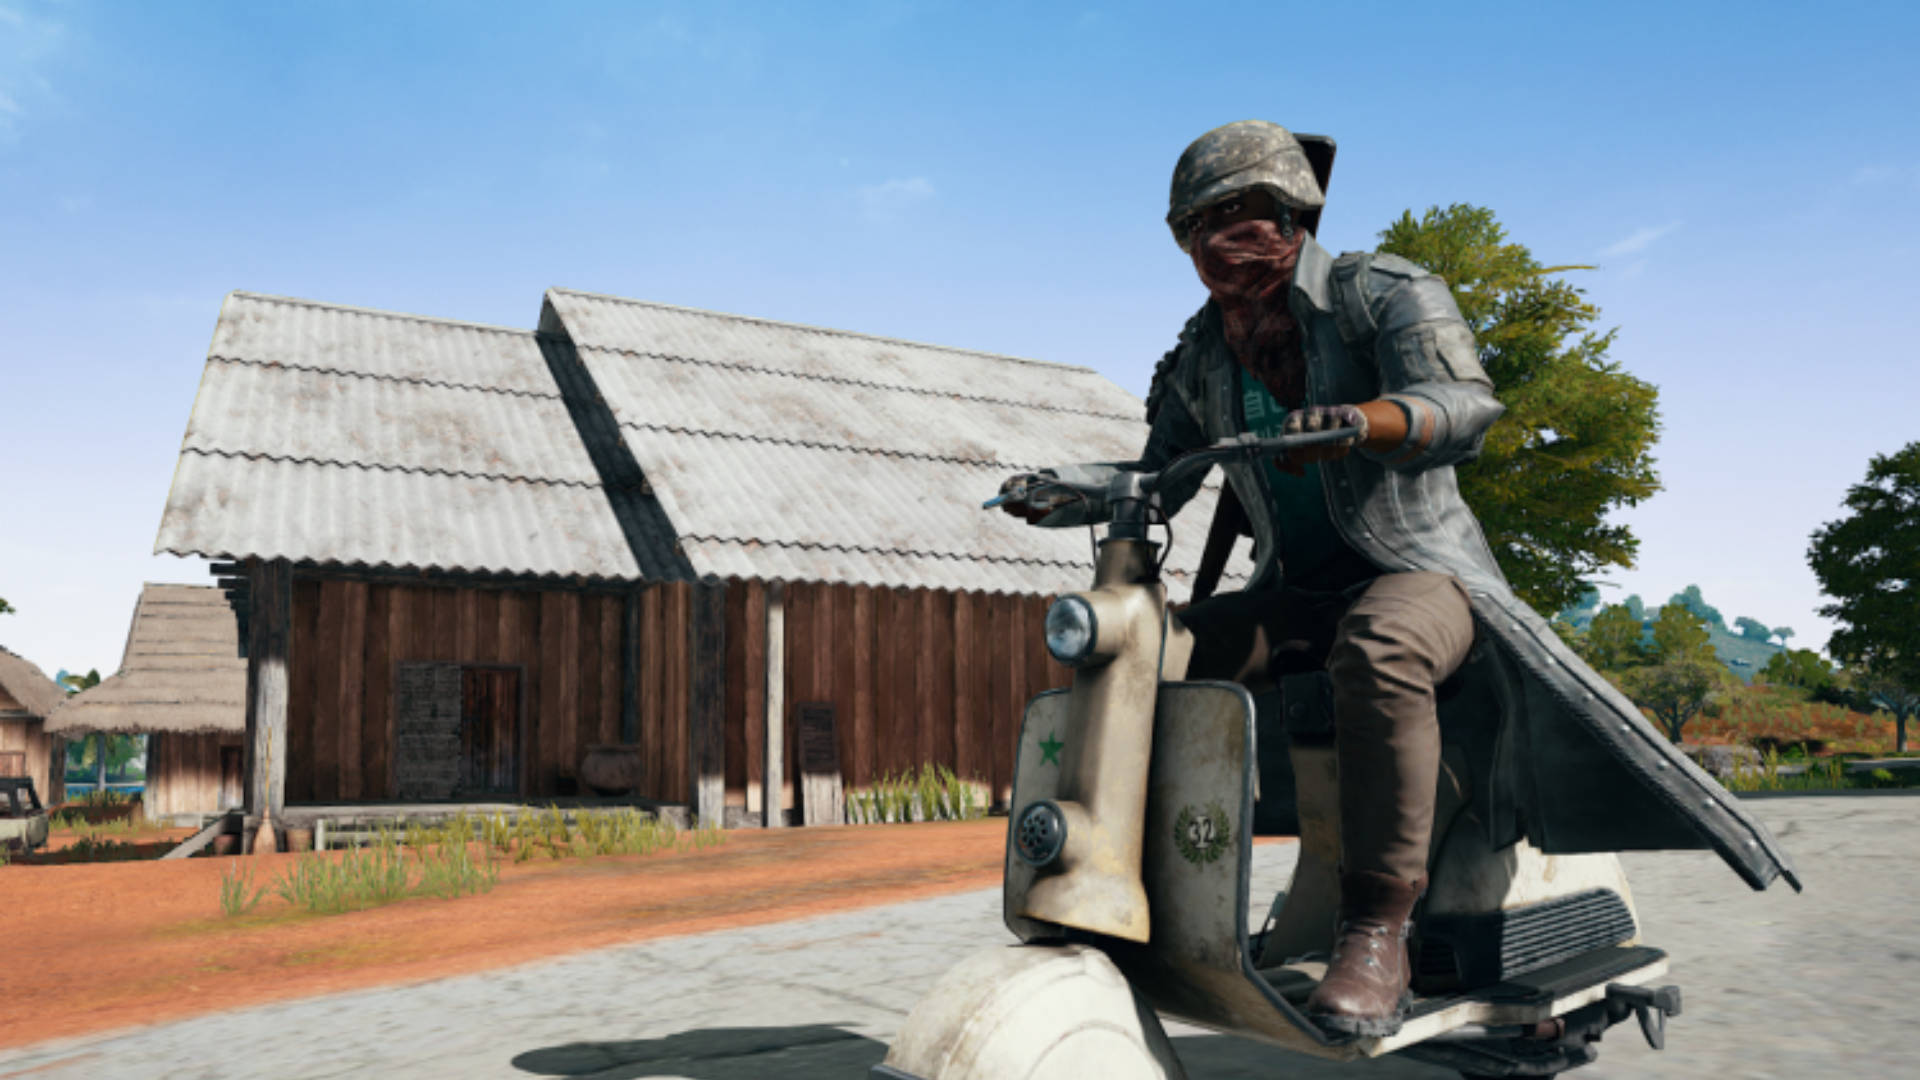 Pubg Season 3 Player Riding The Scooter